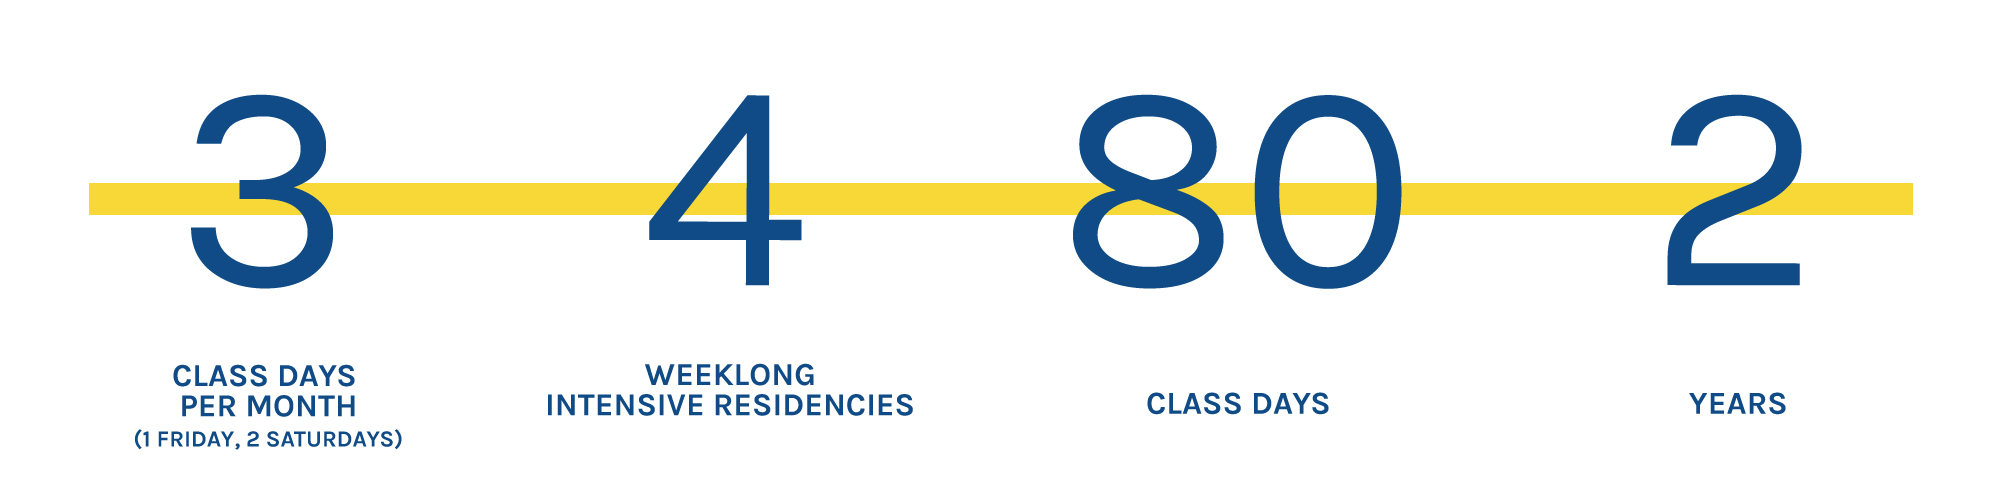 Infographic with blue text and yellow accent color. Text reads: 3 class days per month (1 Friday, 2 Saturdays) , 4 weeklong intensive residencies, 80 class days, 2 years